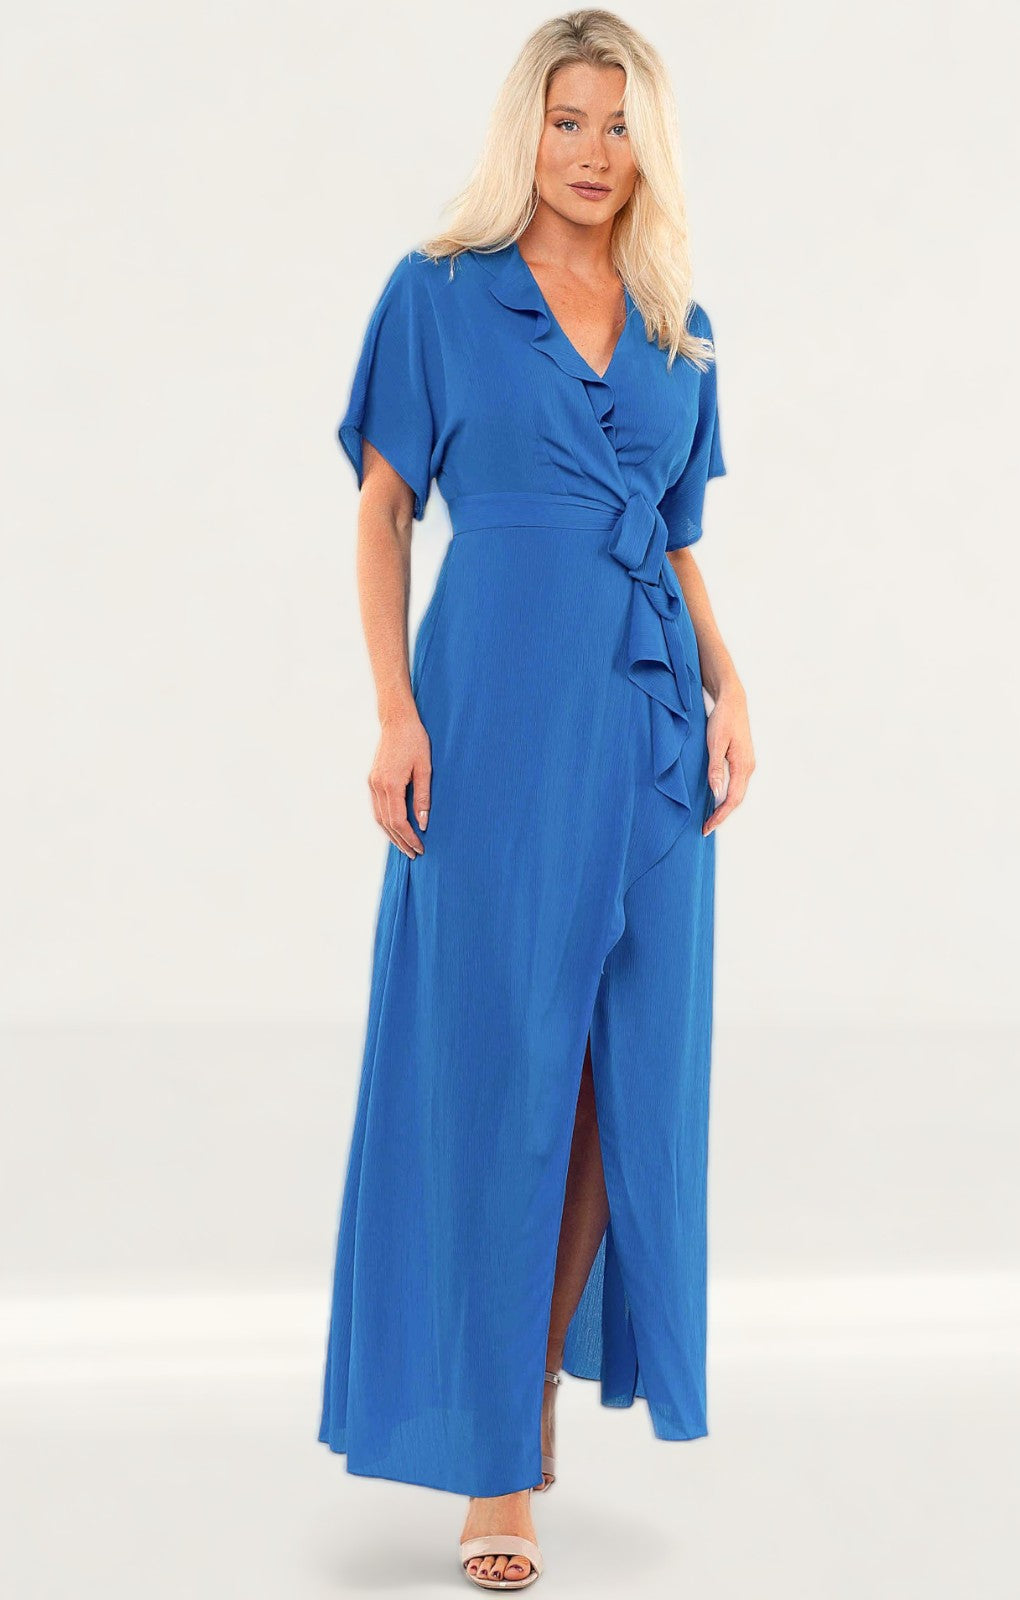 Whistles Electric Blue Frill Wrap Maxi Dress product image